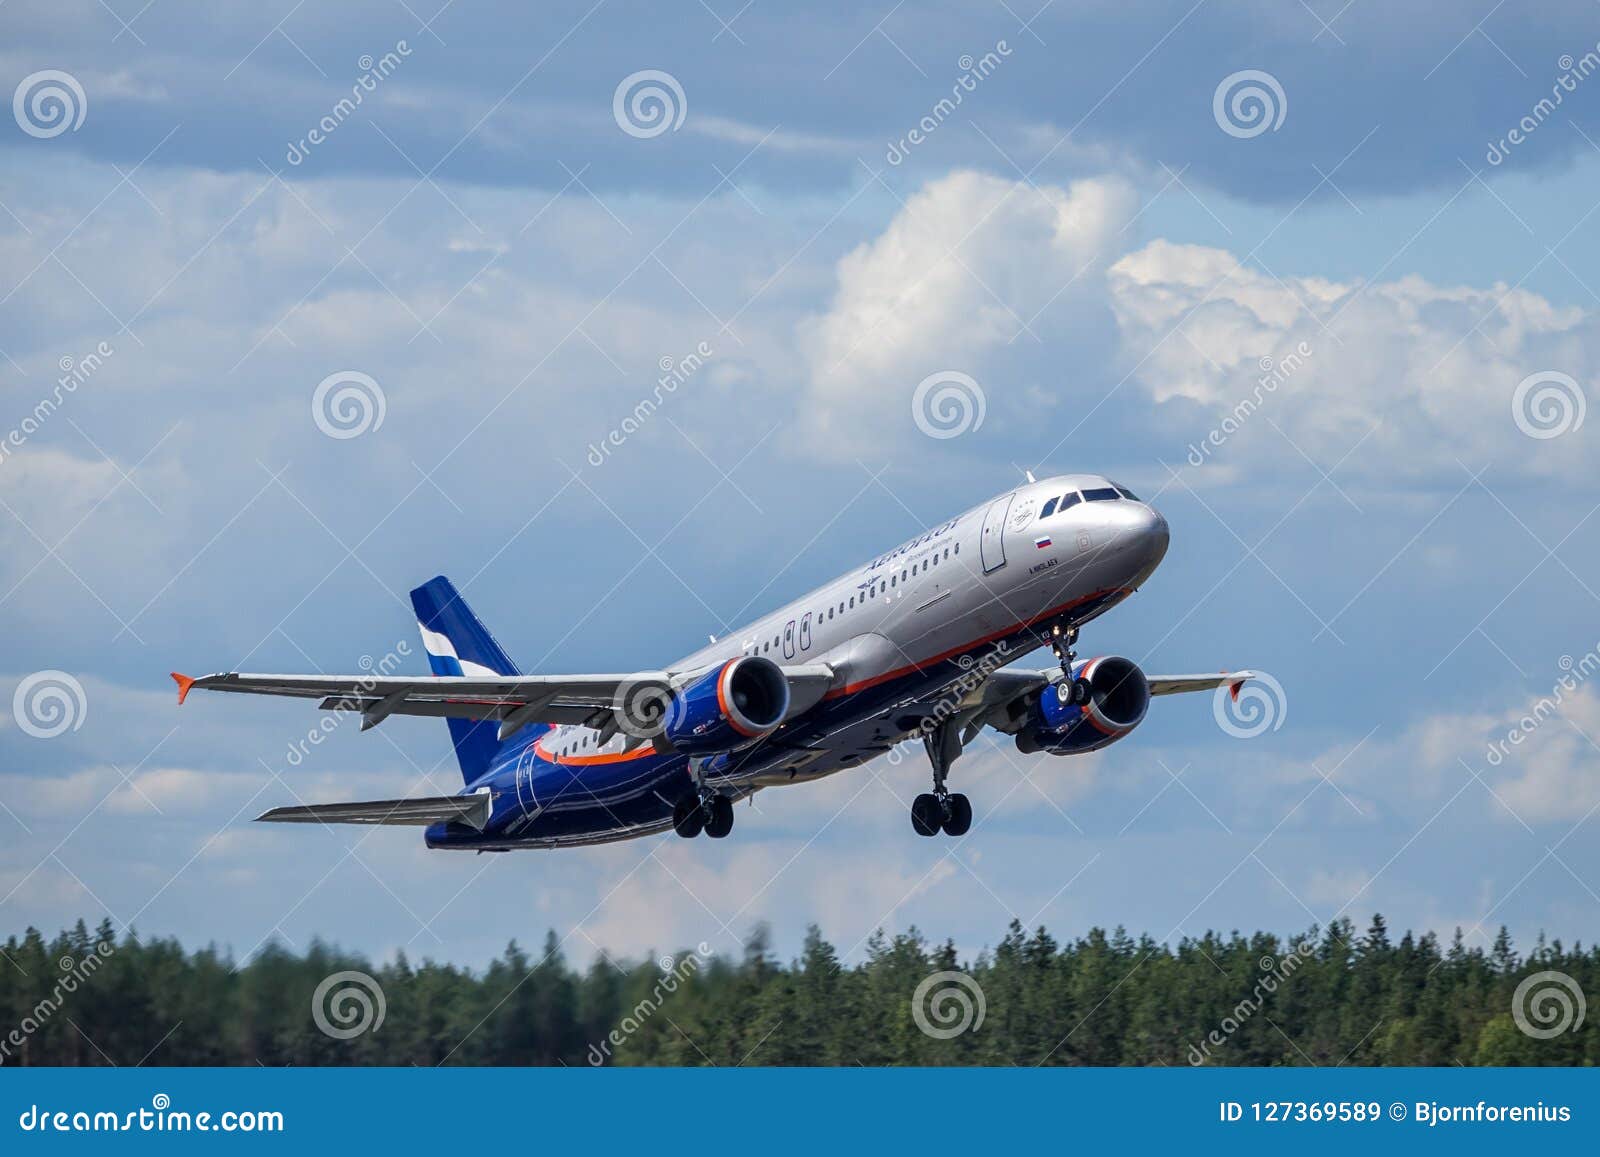 Aeroflot Russian Airlines Airbus A320 - 200 Take Off Editorial Stock Image - Image of aviation, cloud: 127369589